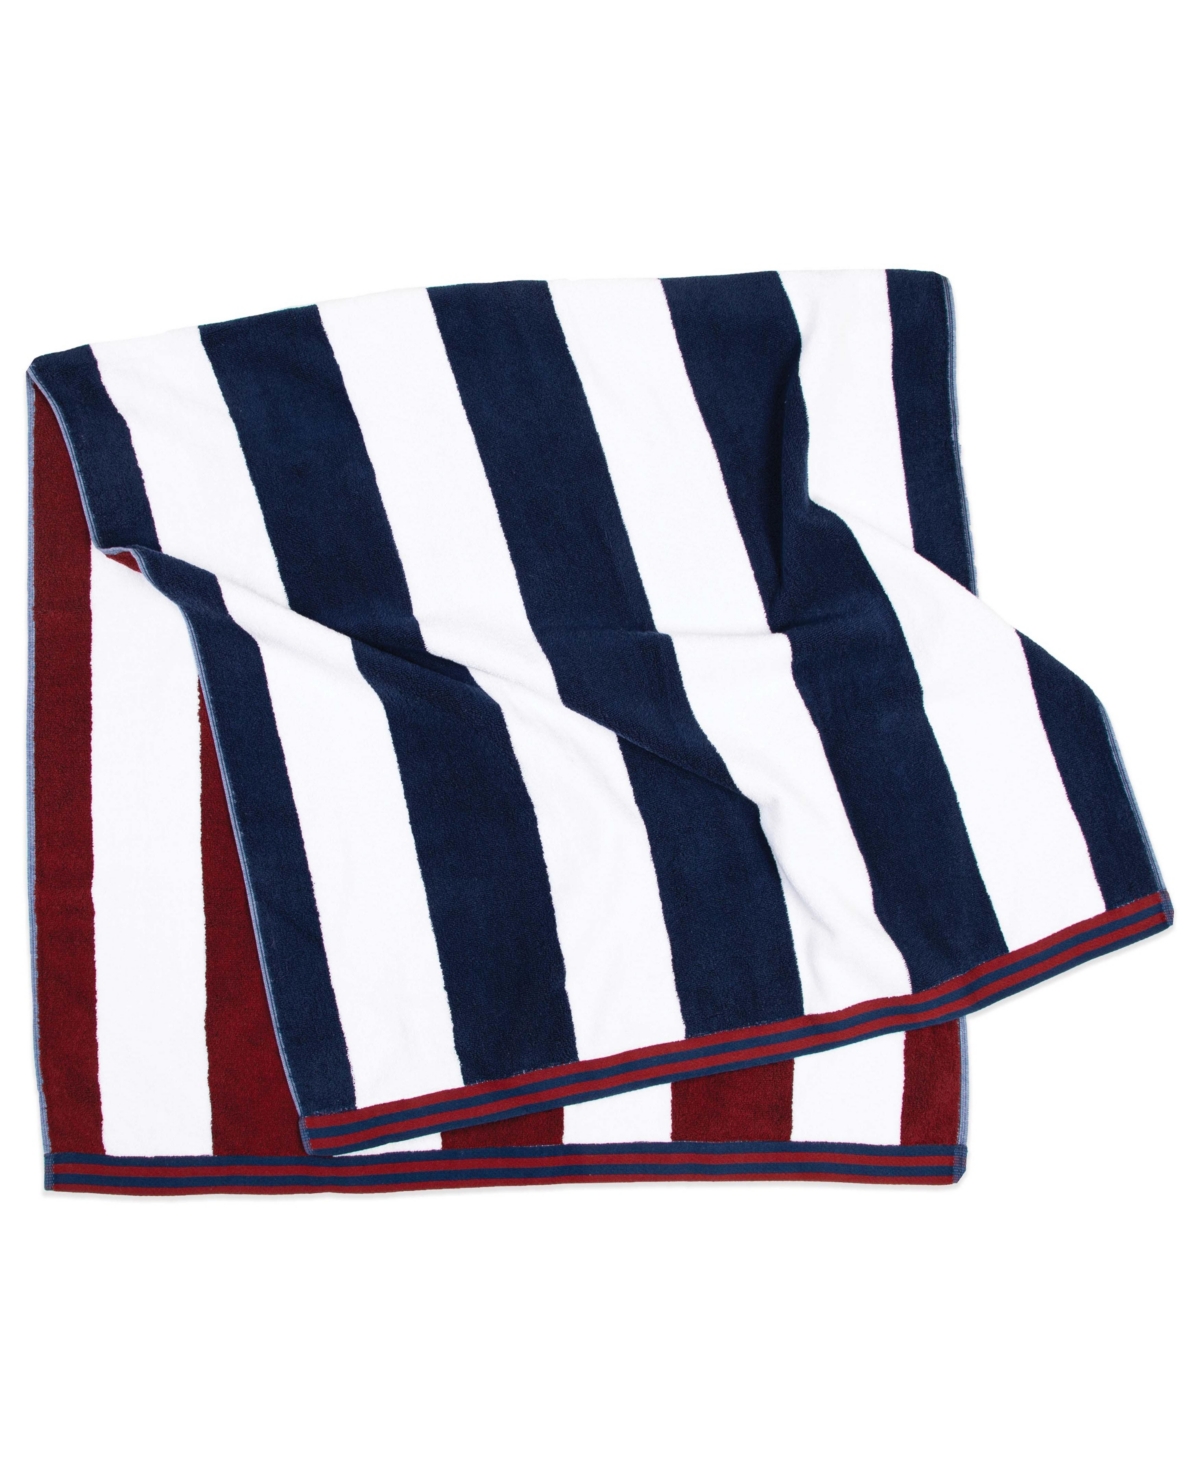 Aston And Arden Reversible Luxury Beach Towel (35x70 In., 600 Gsm), Striped Color Options, Oversized, Thick, Soft Ri In Navy/maroon